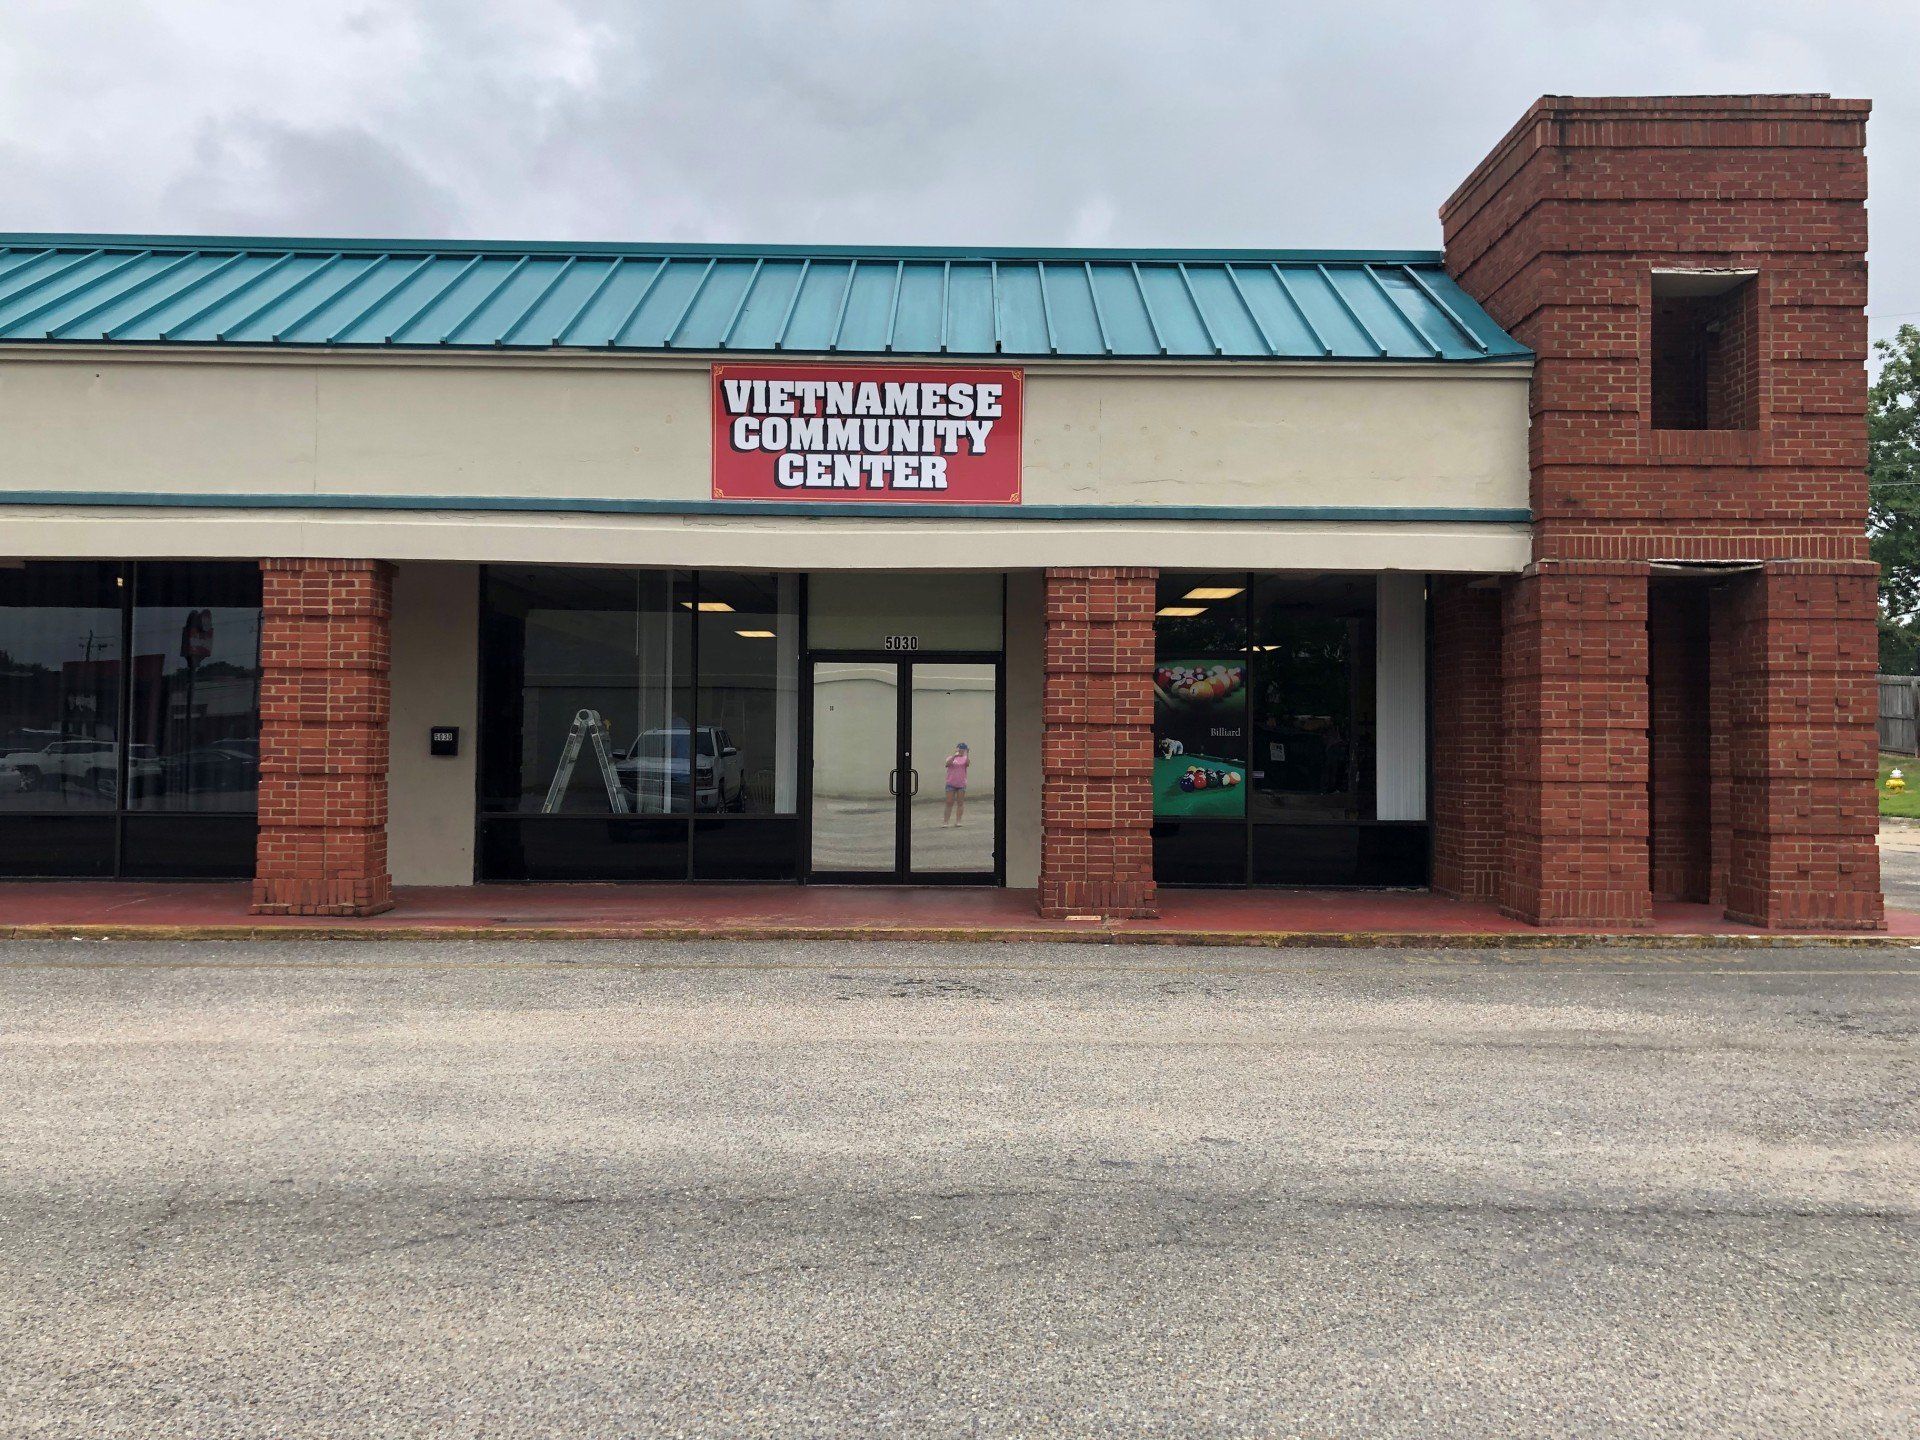 storefront windows professionally Secured on 7.23.2019 - commercial security tint film installation at business in Alabama